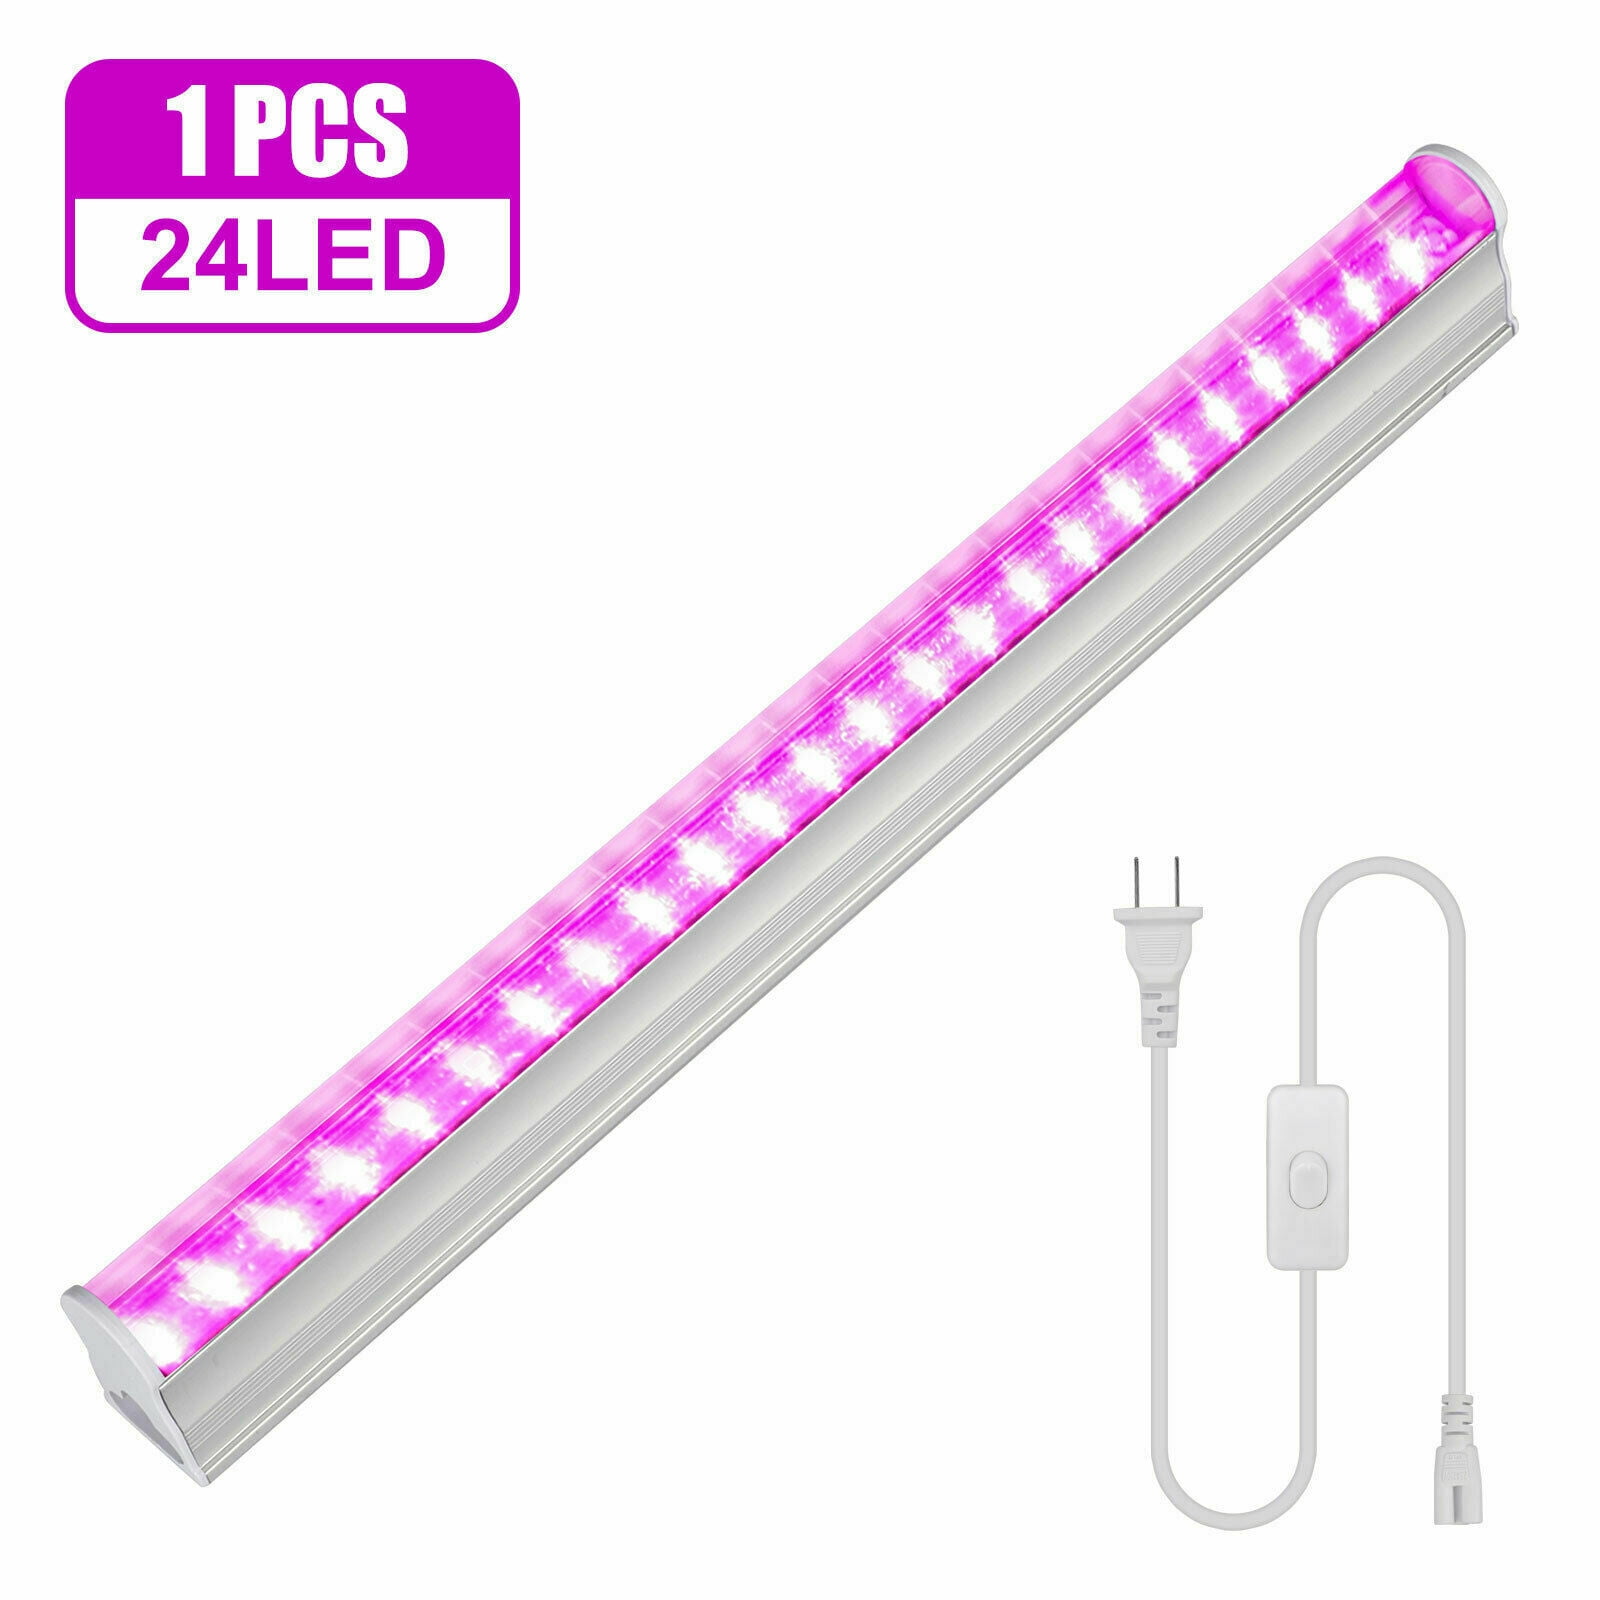 Hydroponics Best Grow Lights for Indoor Plants Greenhouse FECiDA 300W LED Grow Light Sunlike Full Spectrum LED Plant Grow Light with Dual ON/Off Switch and Daisy Chain Function for Grow Tent 